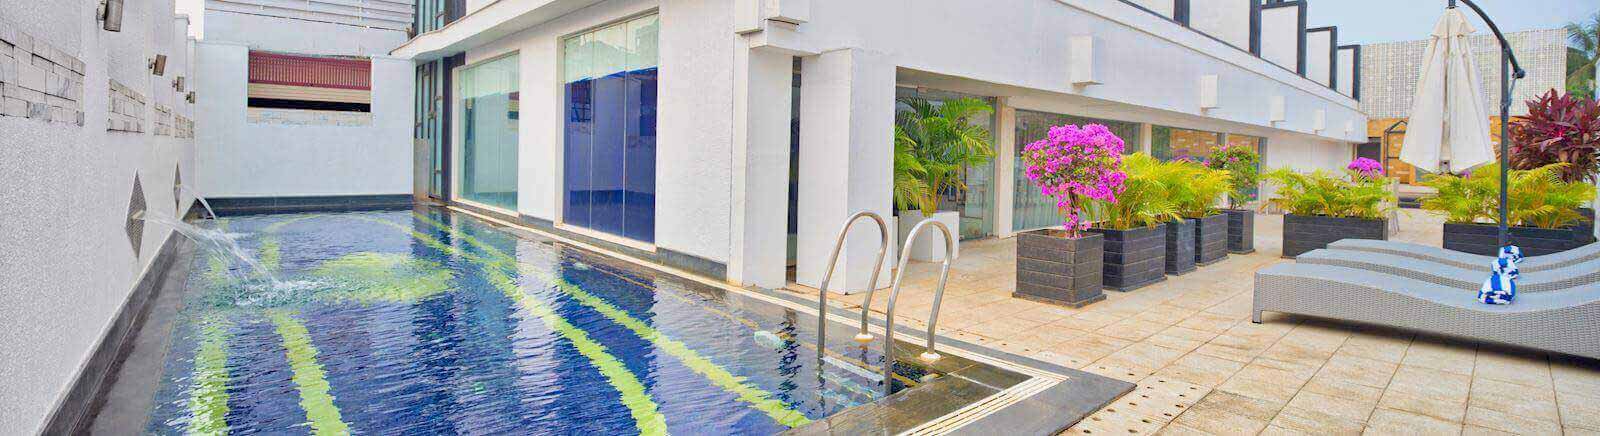 Manage Booking of Ginger Hotel